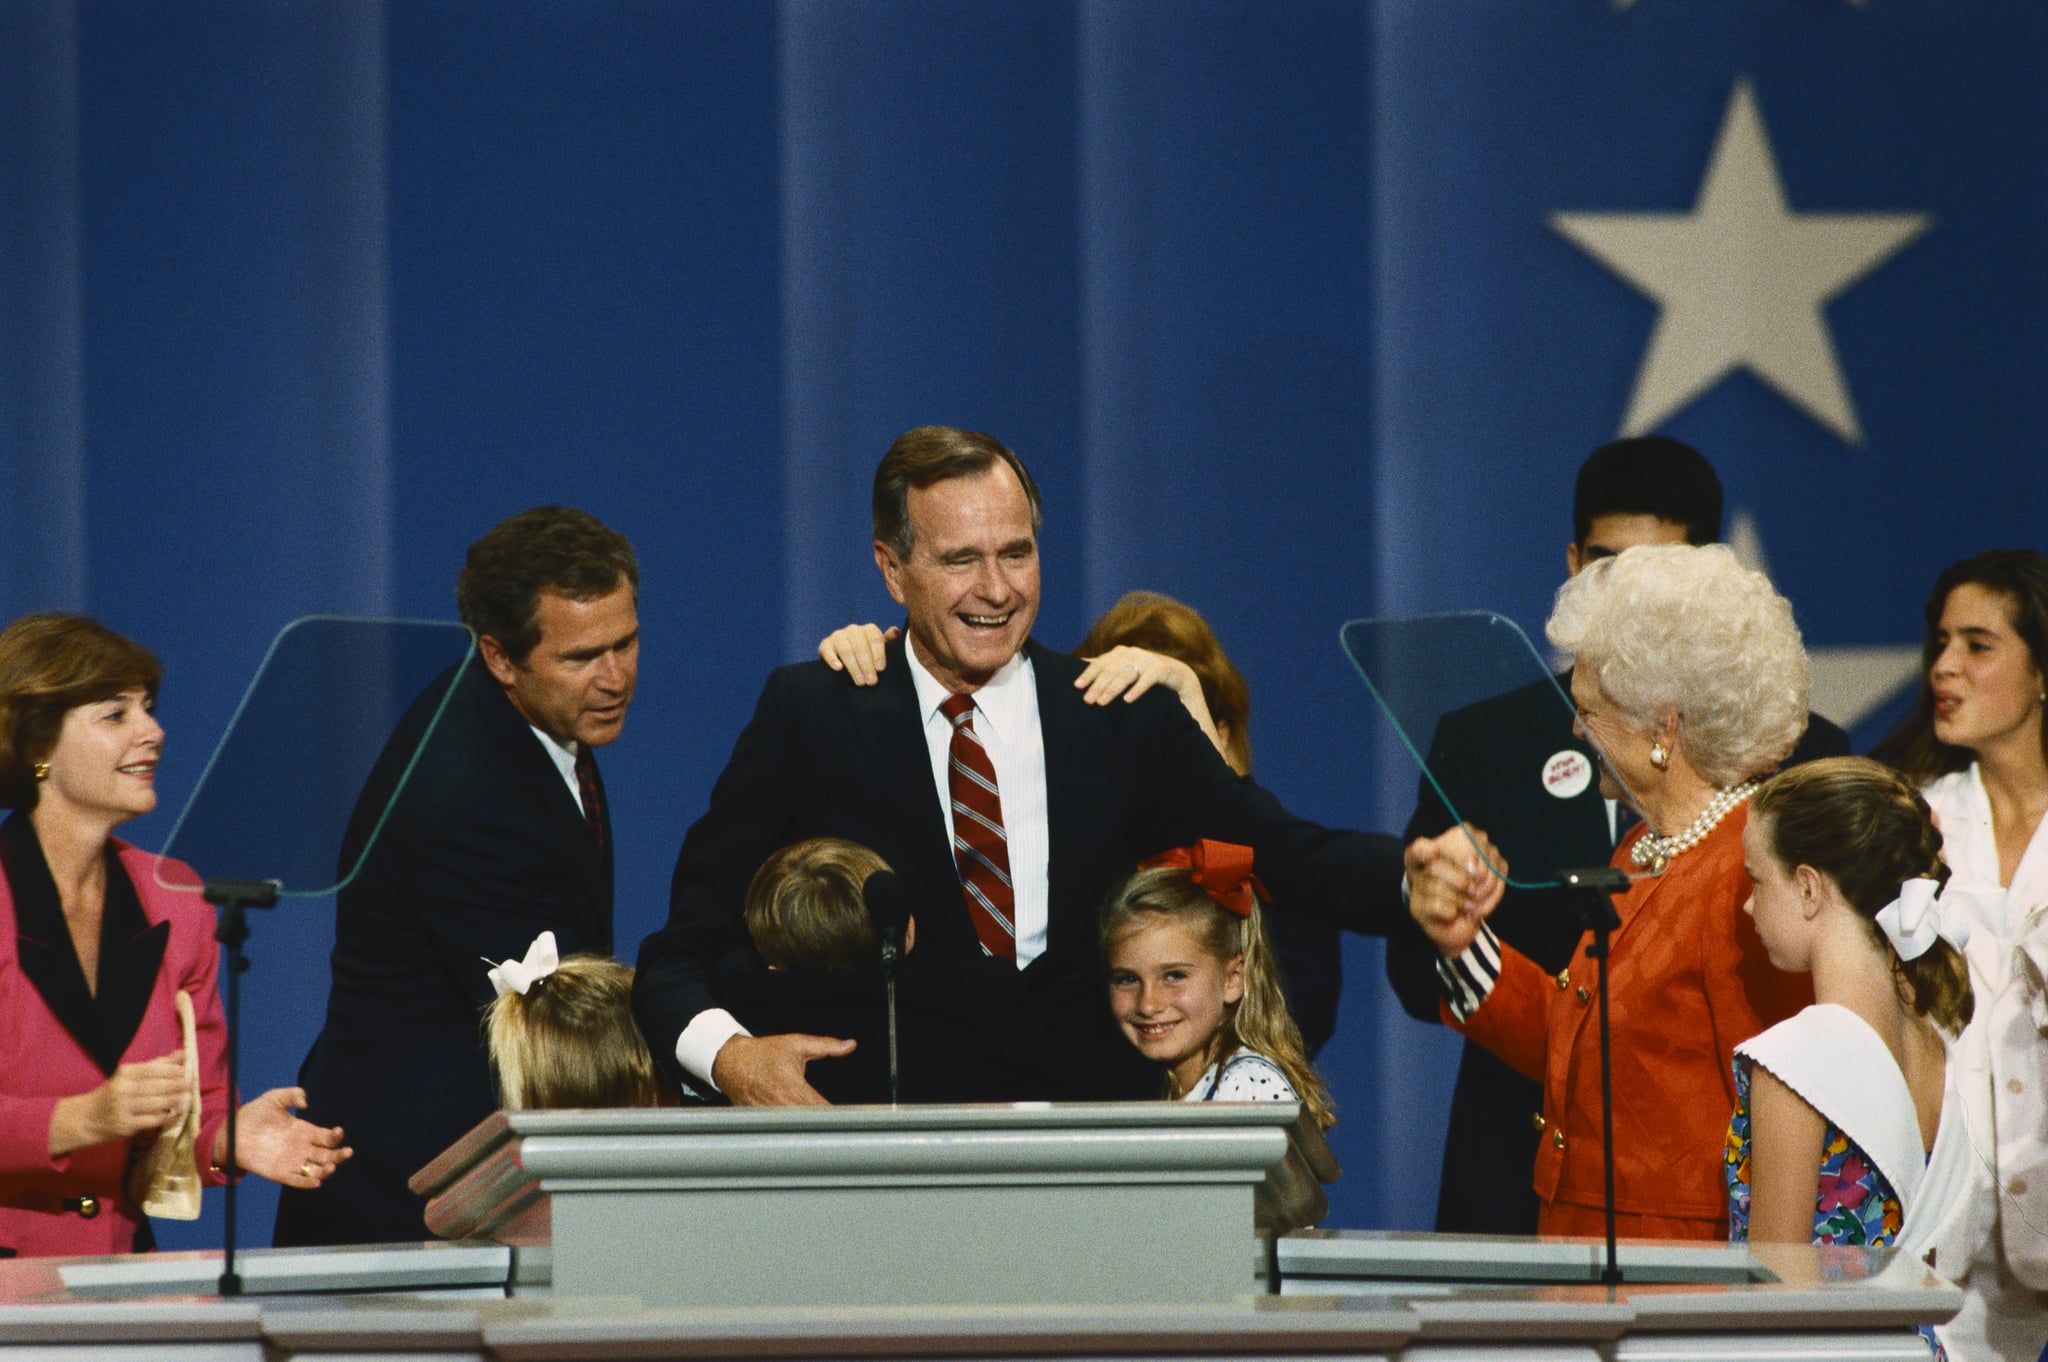 George Bush on the podium at the 1992 Republican National Convention. He is joined by (left to right) daugther-in-law Laura Bush, her husband George W., and her daughter Jenna, an unidentified grandson hugging the President, granddaughter Barbara, wife Barbara, and grandchildren George Prescott (behind Barbara), Lauren, and Noelle. (Photo by © Wally McNamee/CORBIS/Corbis via Getty Images)